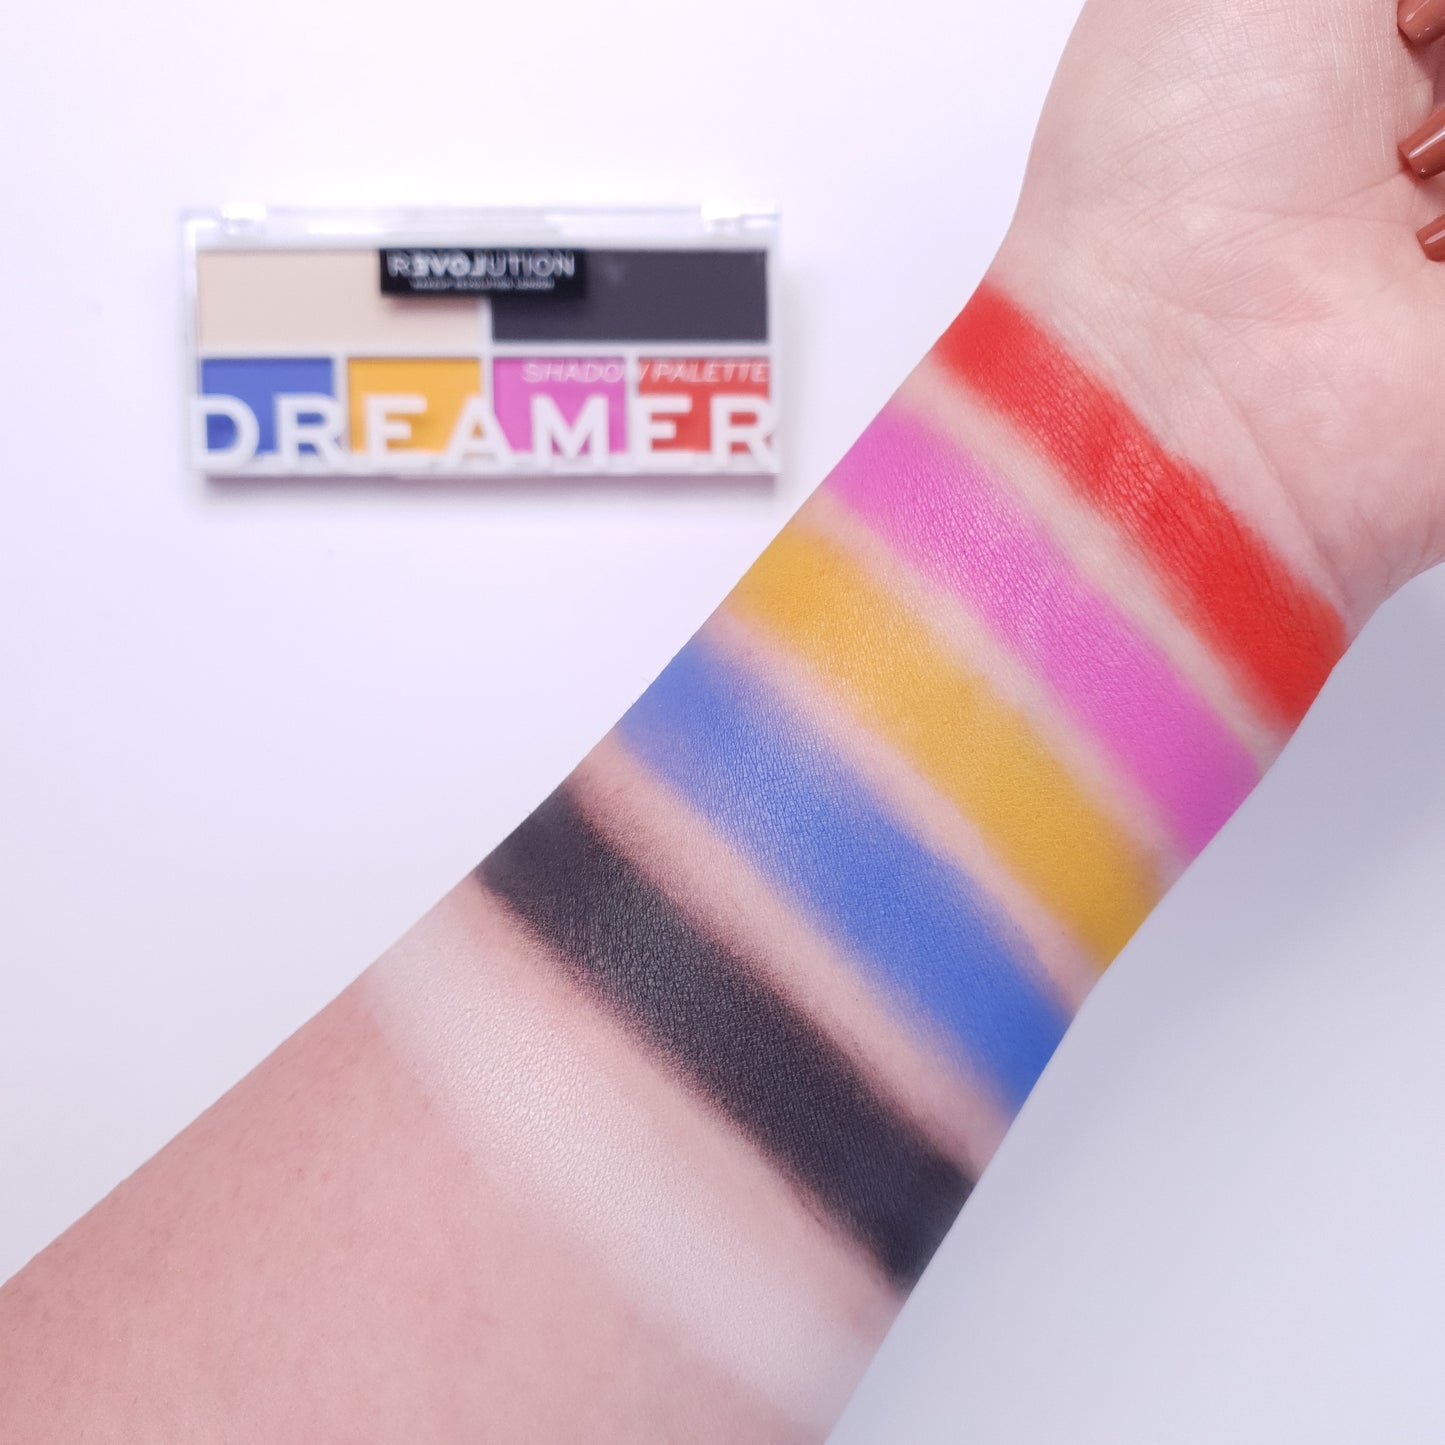 ReLove By Revolution Colour Play Dreamer Eyeshadow Palette